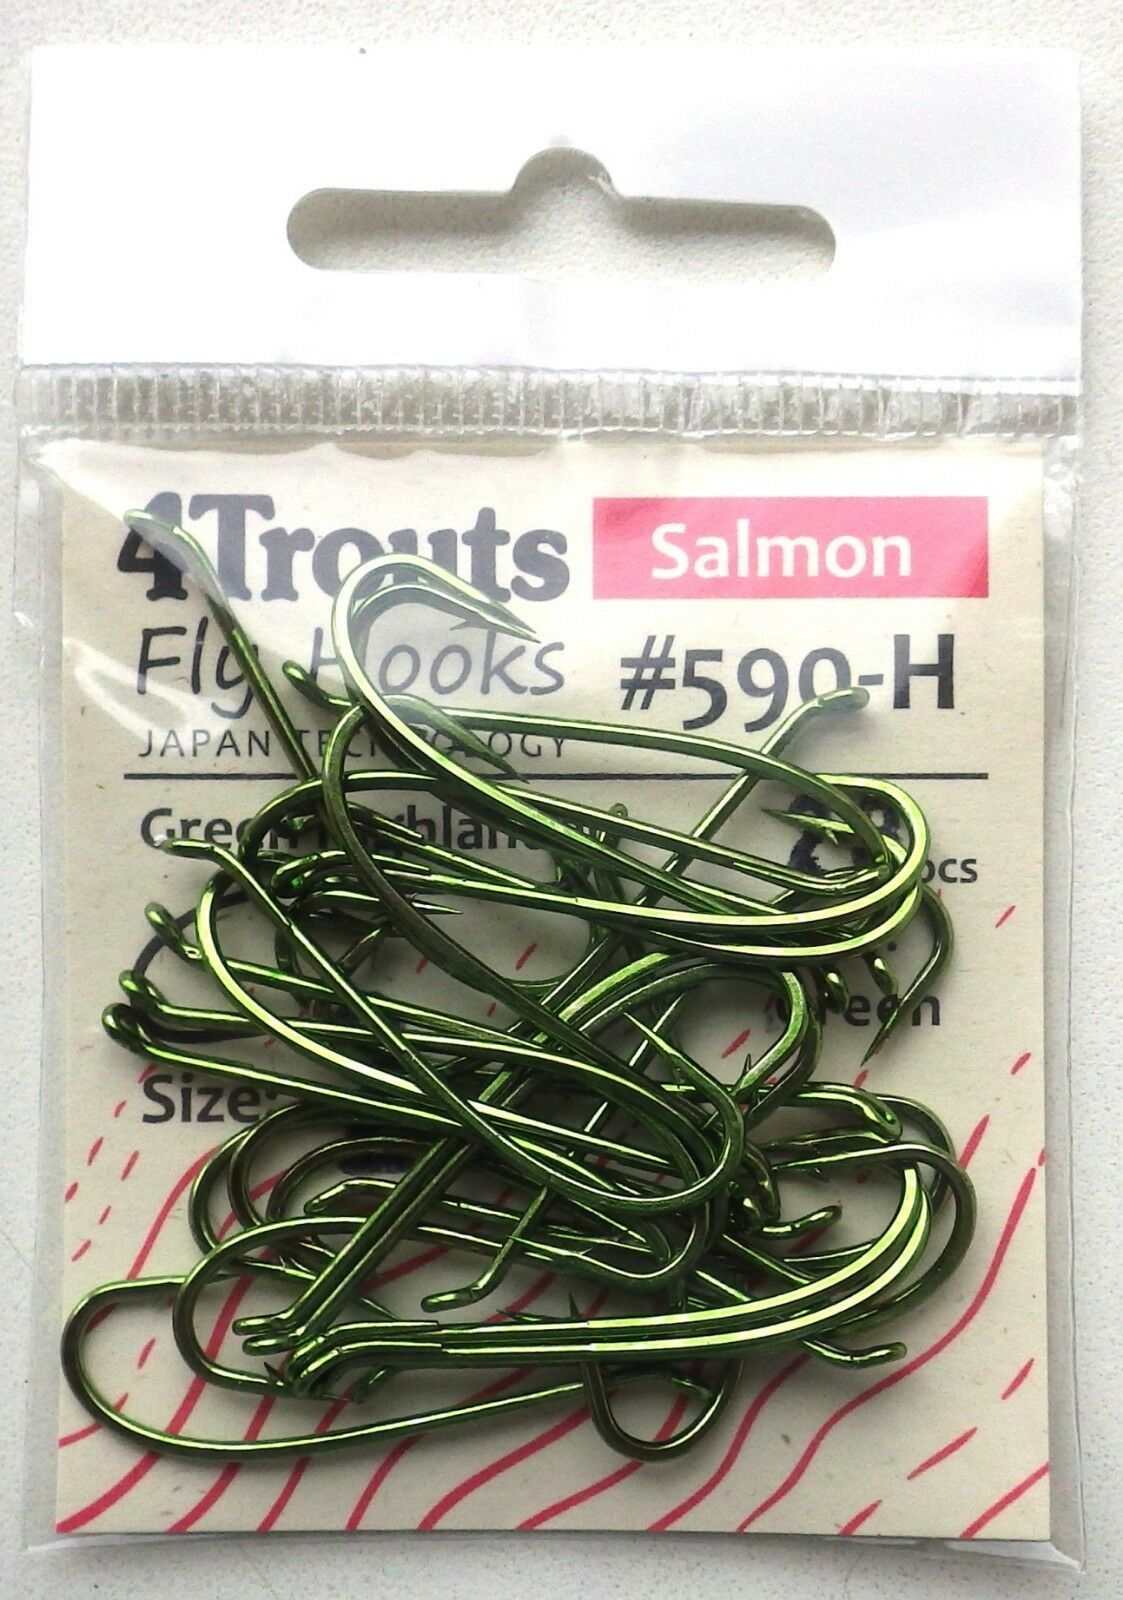 4trouts - Salmon fly hooks green highlander, size #2, green finished, classic salmon hook